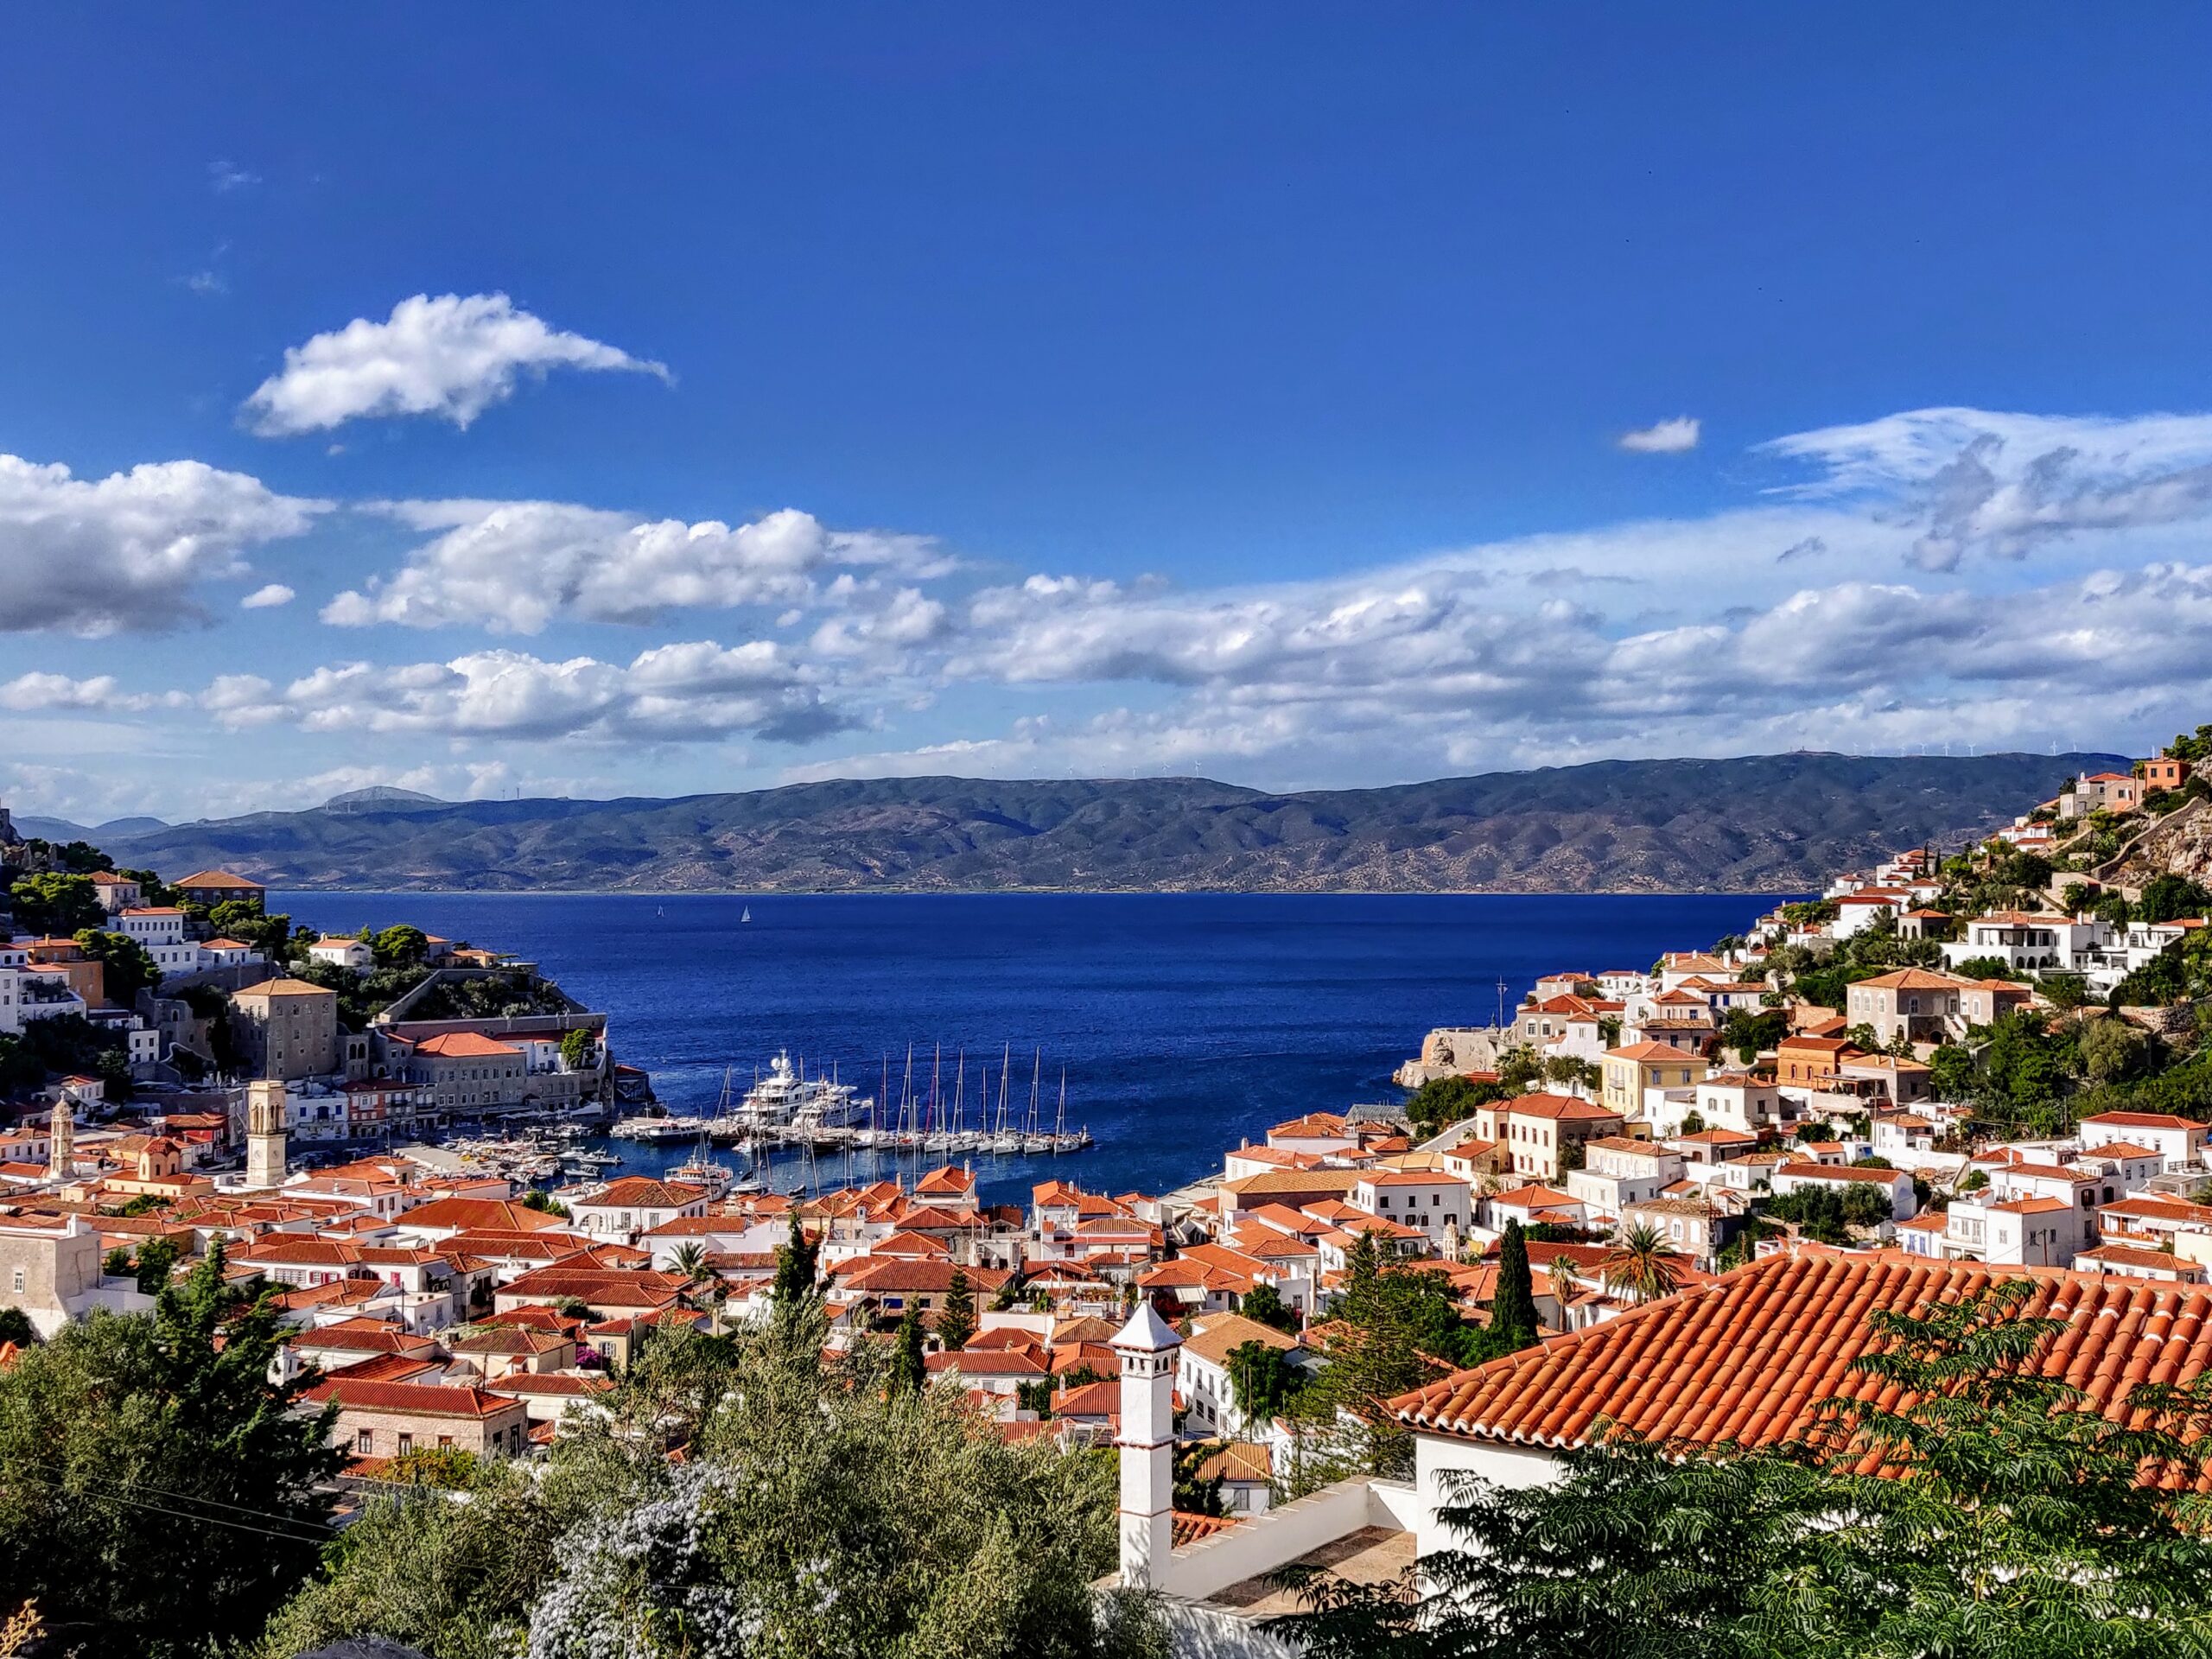 Hydra Island, Just One Of Three Islands On Our 7 Day Alternative Athens, Saronic Islands & Epidaurus Tour Package